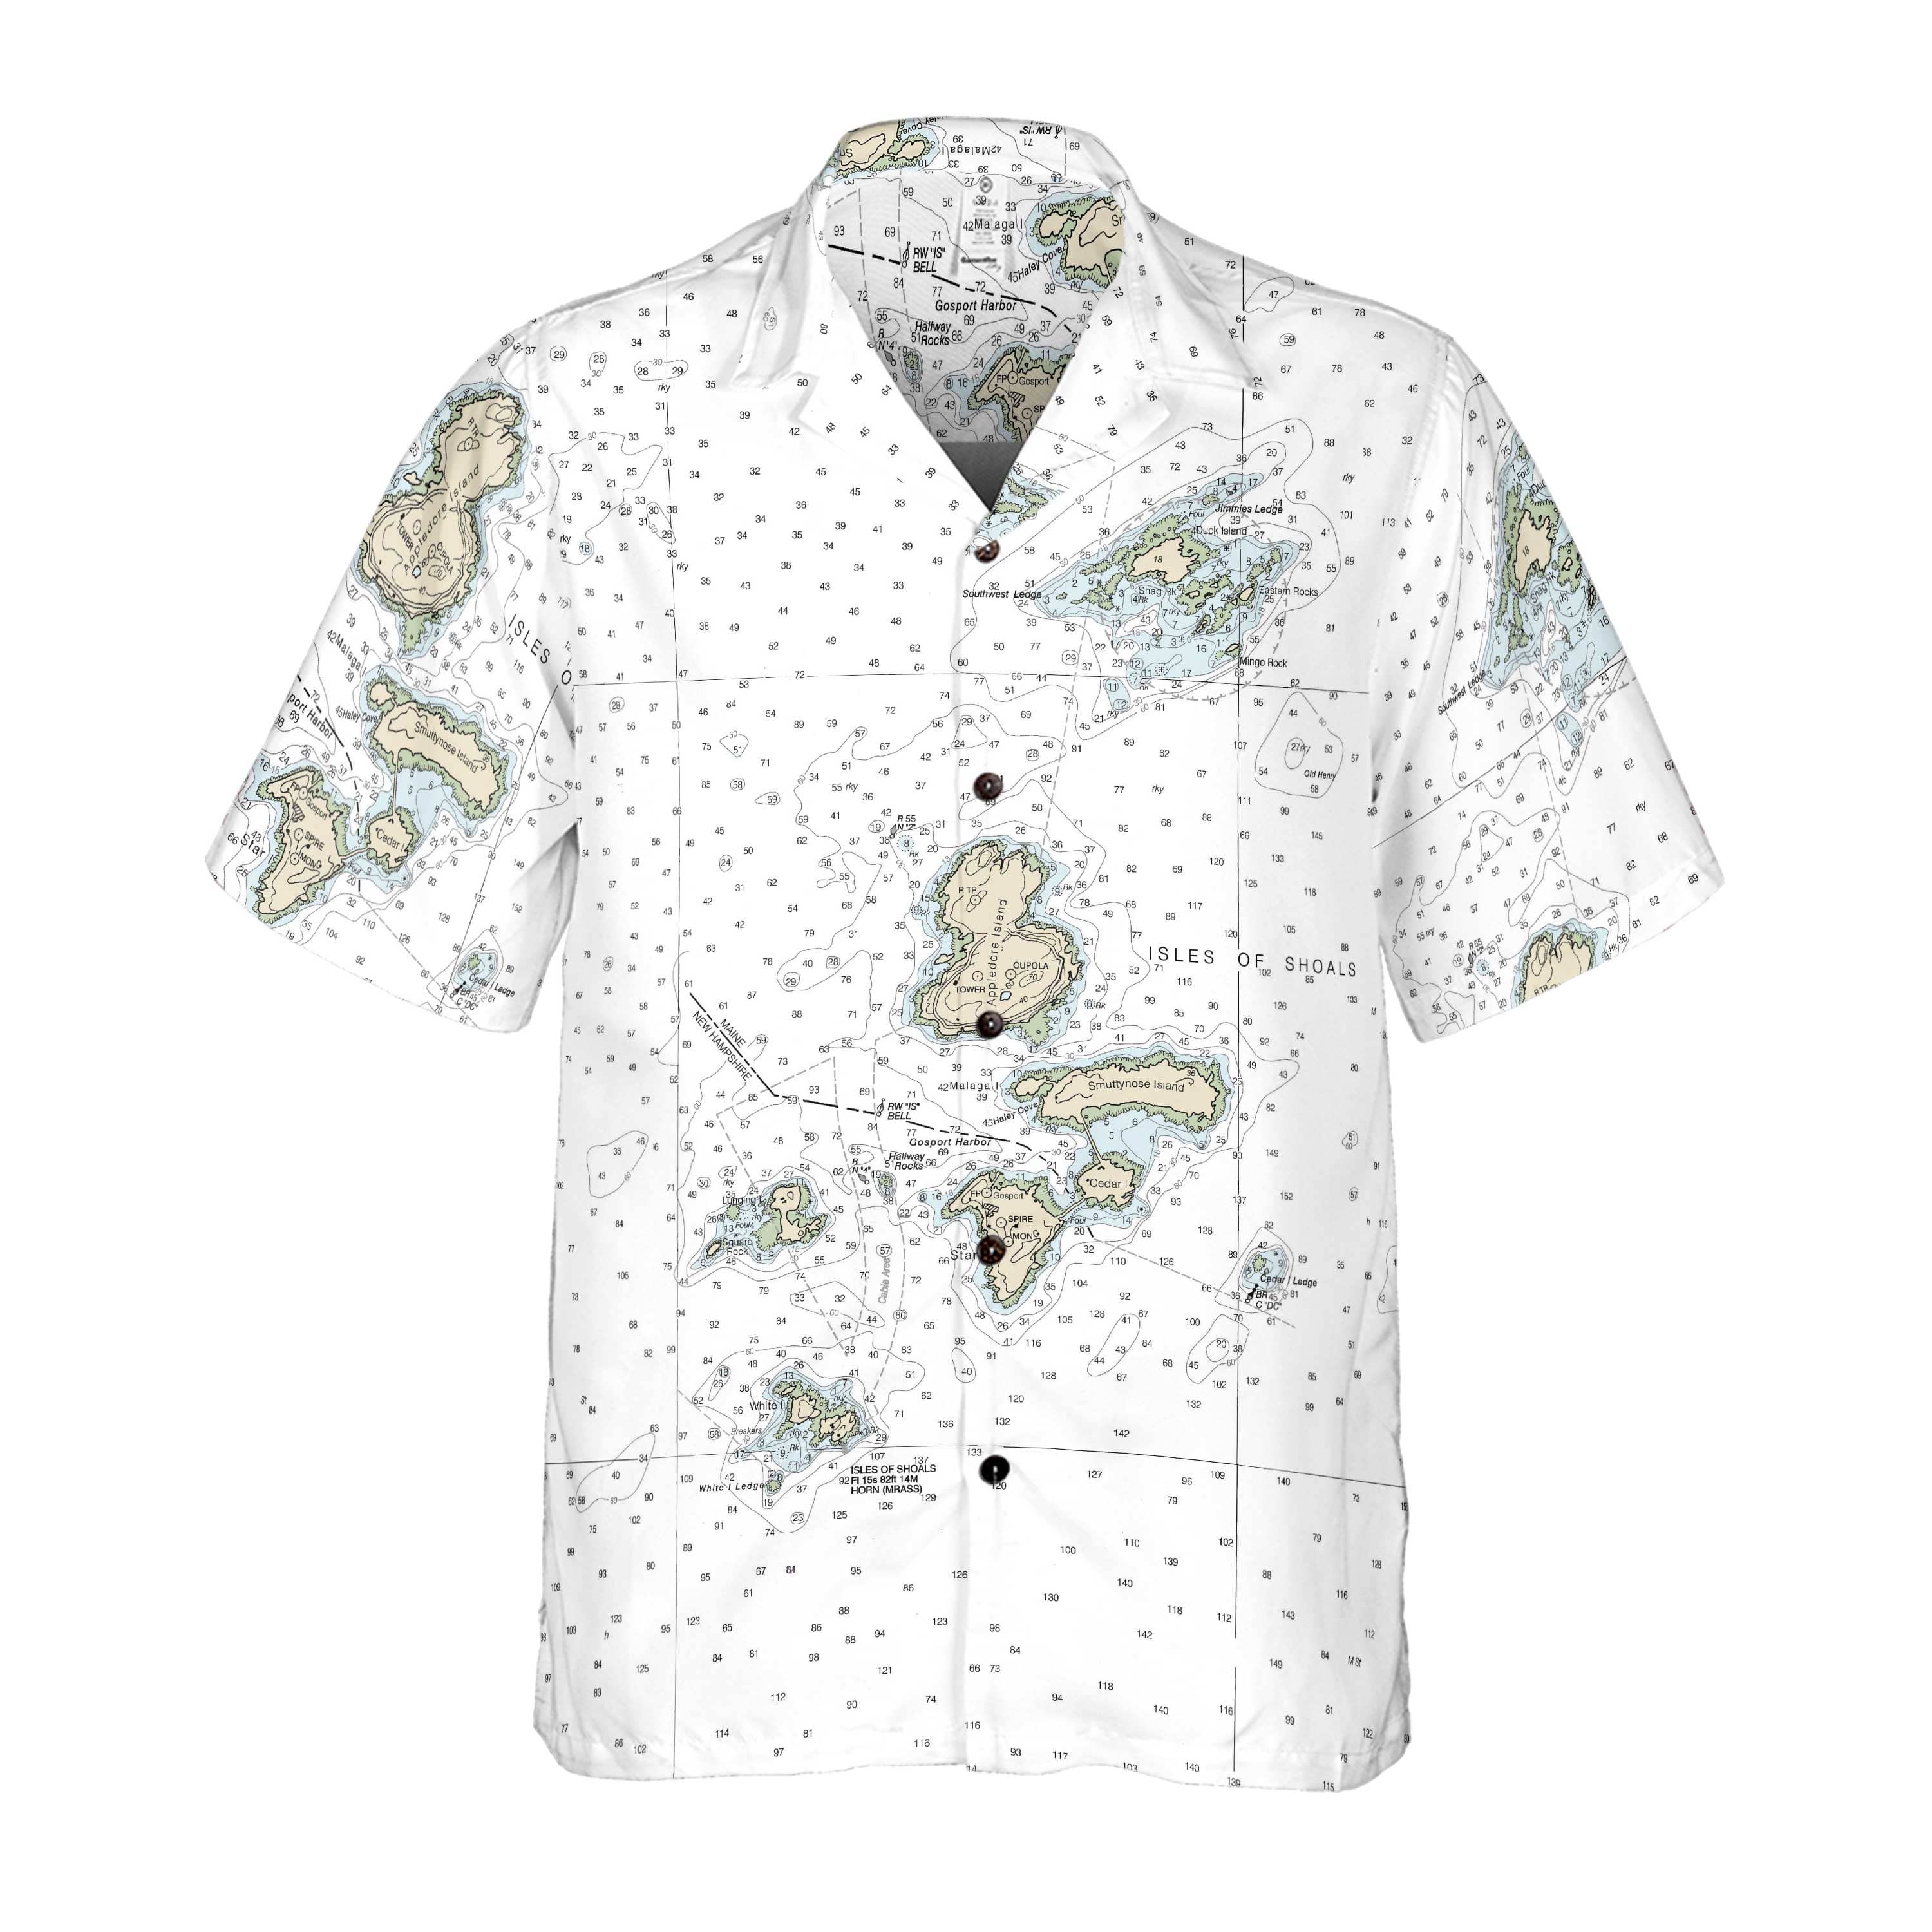 The Isles of Shoals Coconut Button Camp Shirt